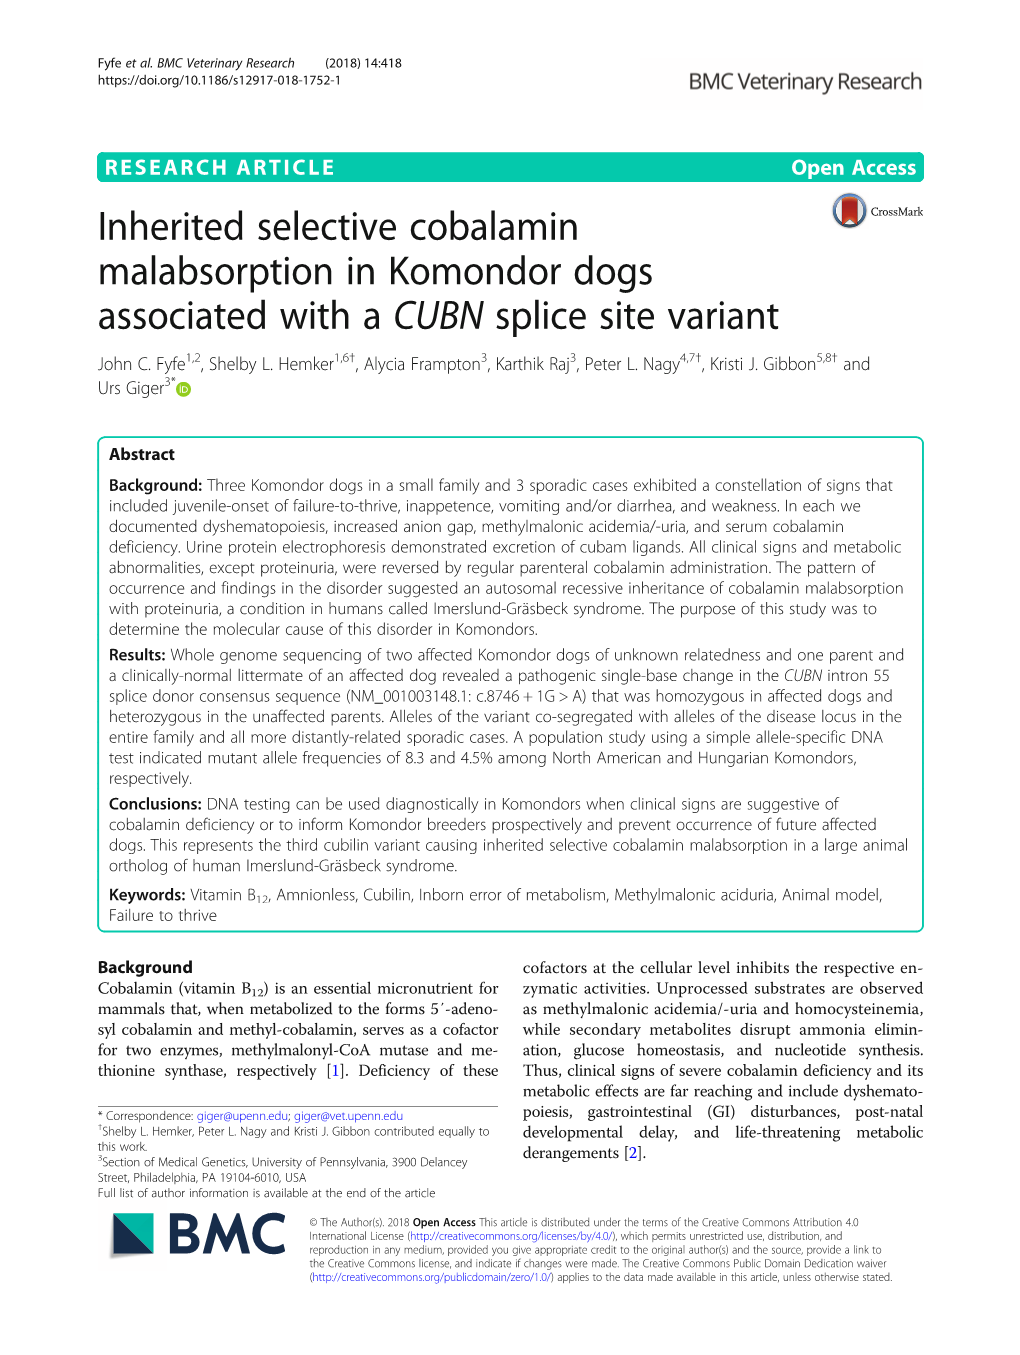 Inherited Selective Cobalamin Malabsorption in Komondor Dogs Associated with a CUBN Splice Site Variant John C